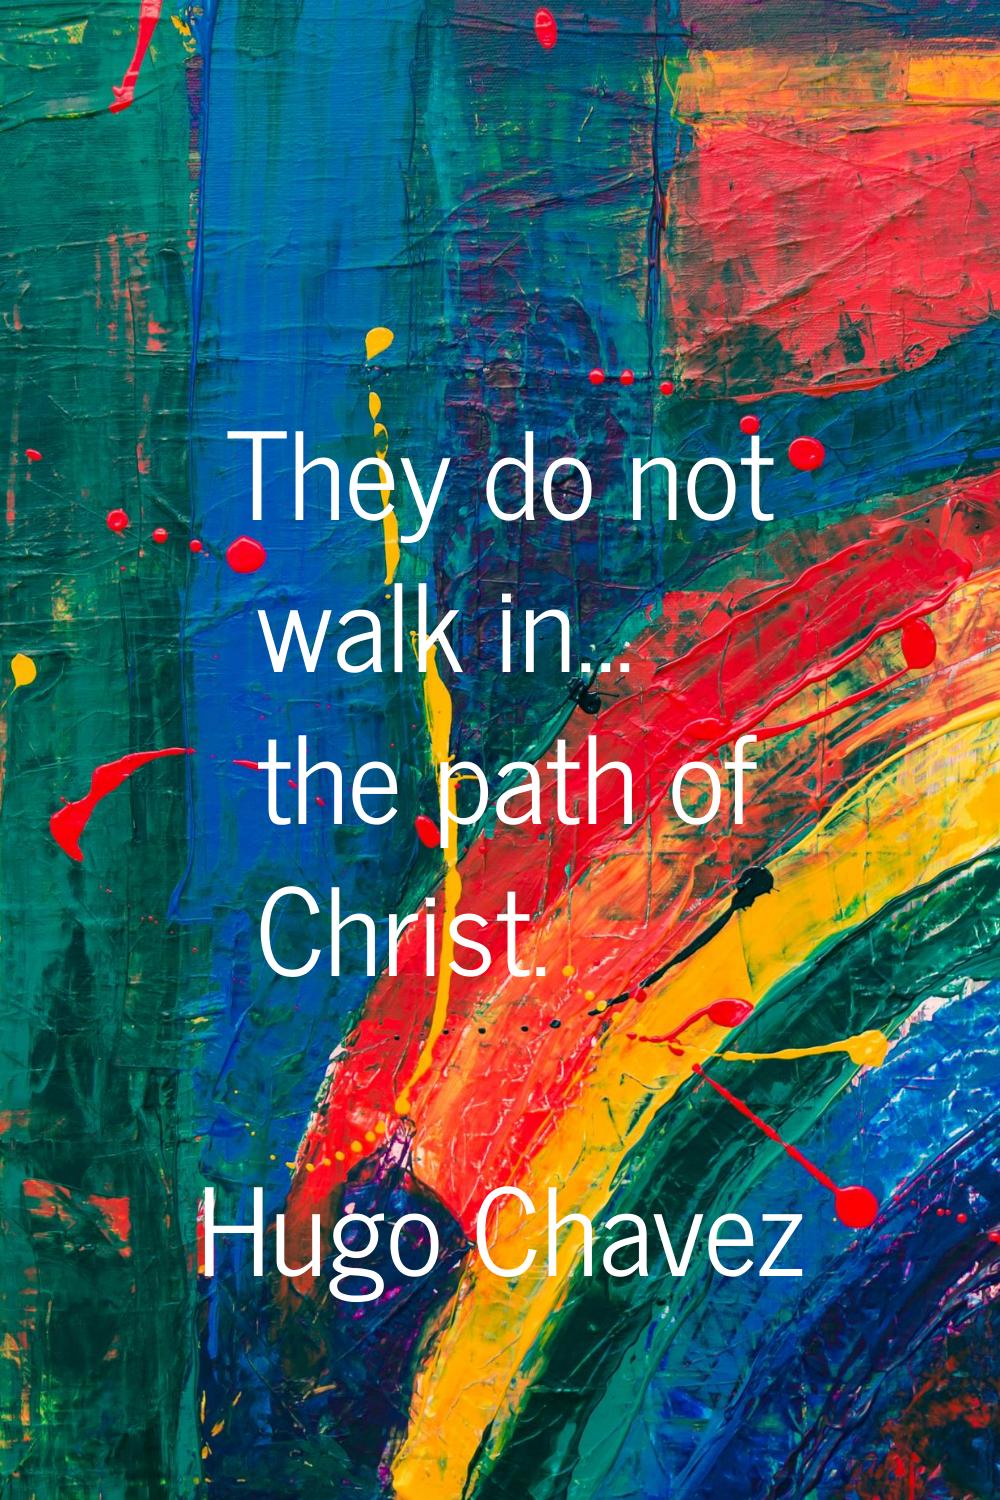 They do not walk in... the path of Christ.